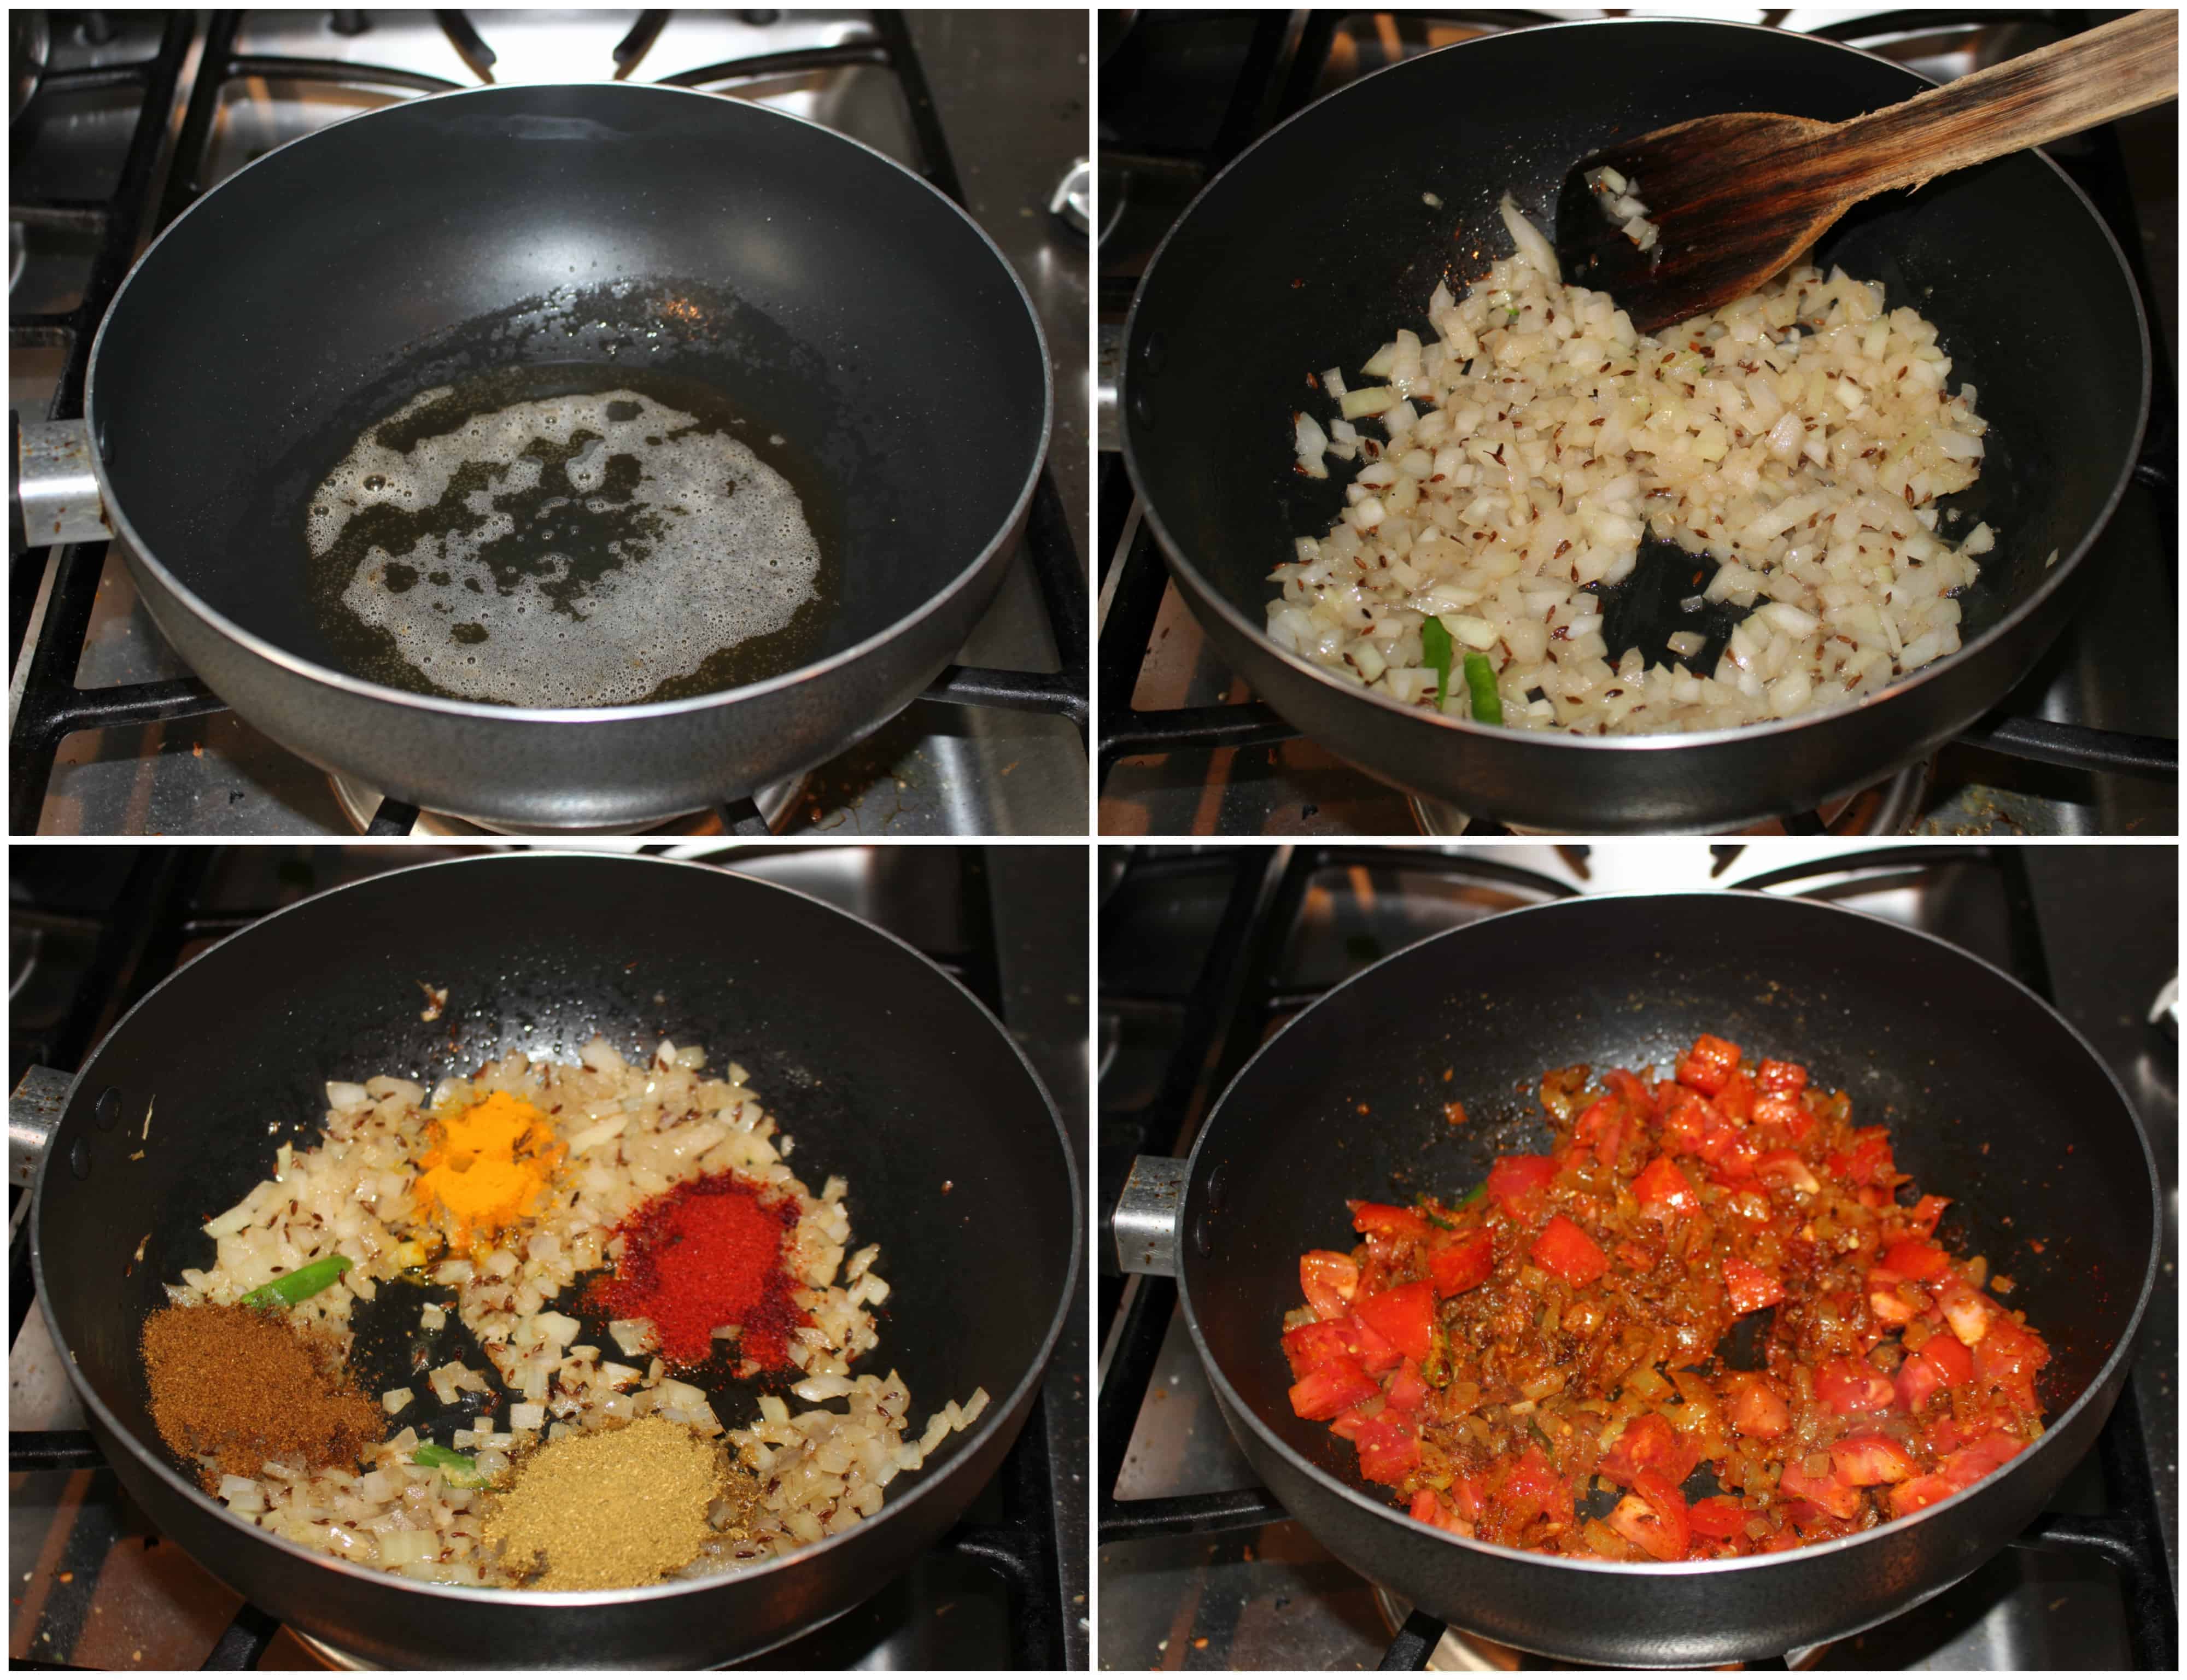 Cooking the ingredients in a pan